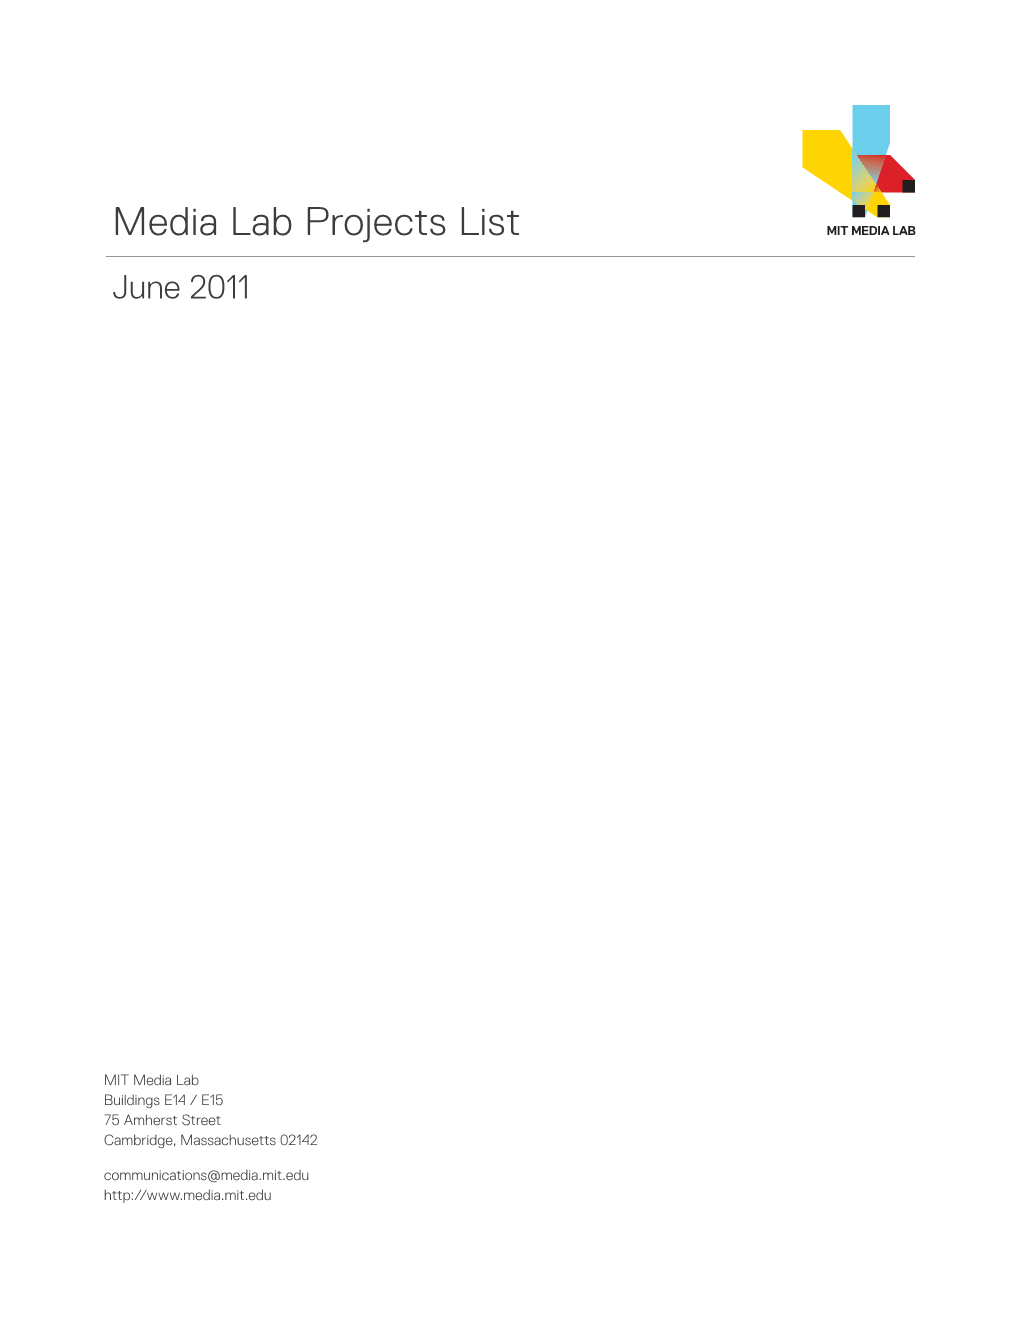 Media Lab Projects List June 2011